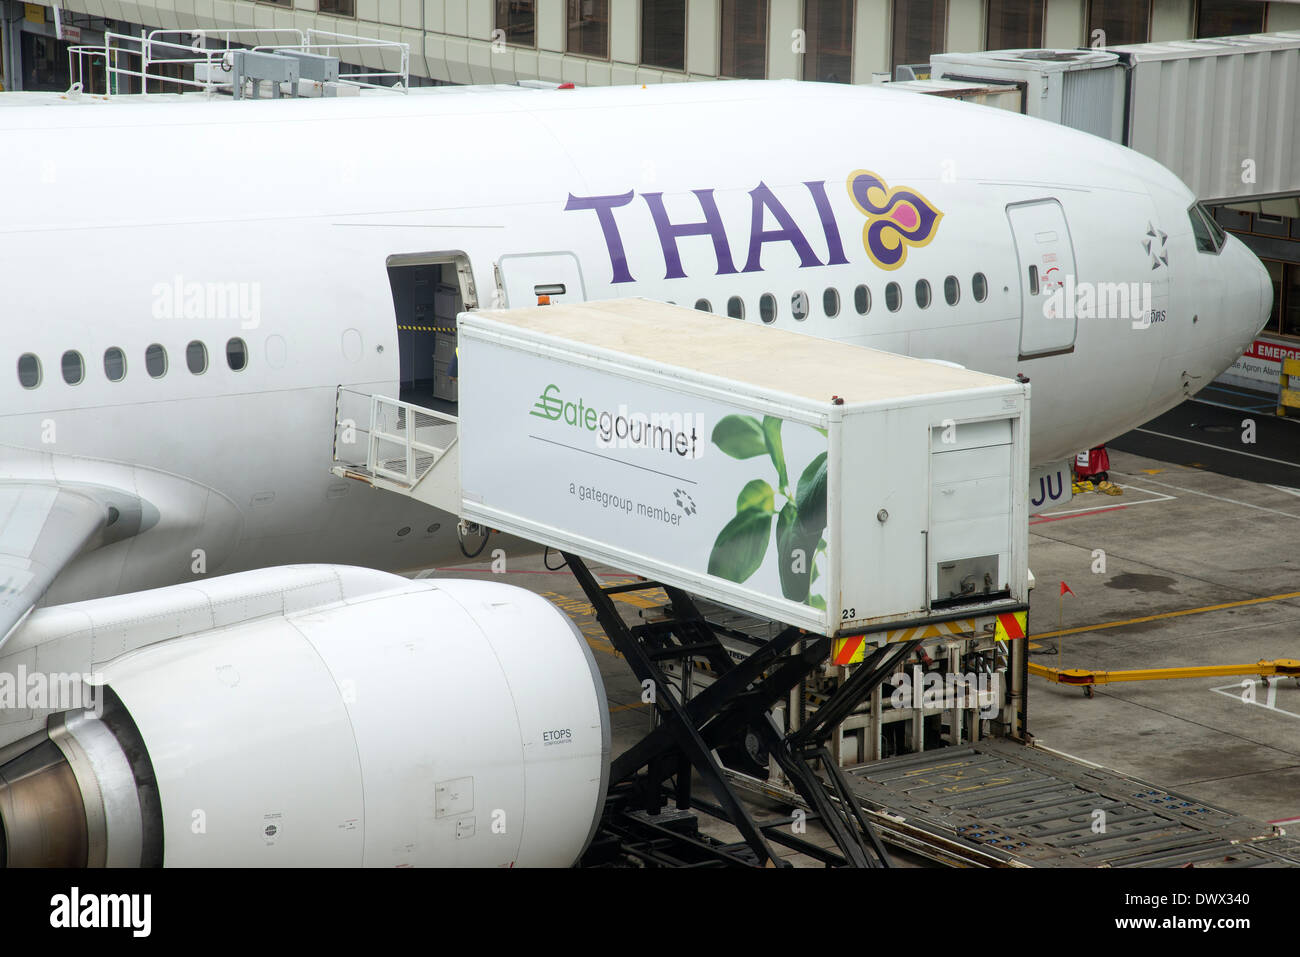 Thai Airways Boeing 777 on a stand at Auckland International Airport North Island New Zealand Stock Photo